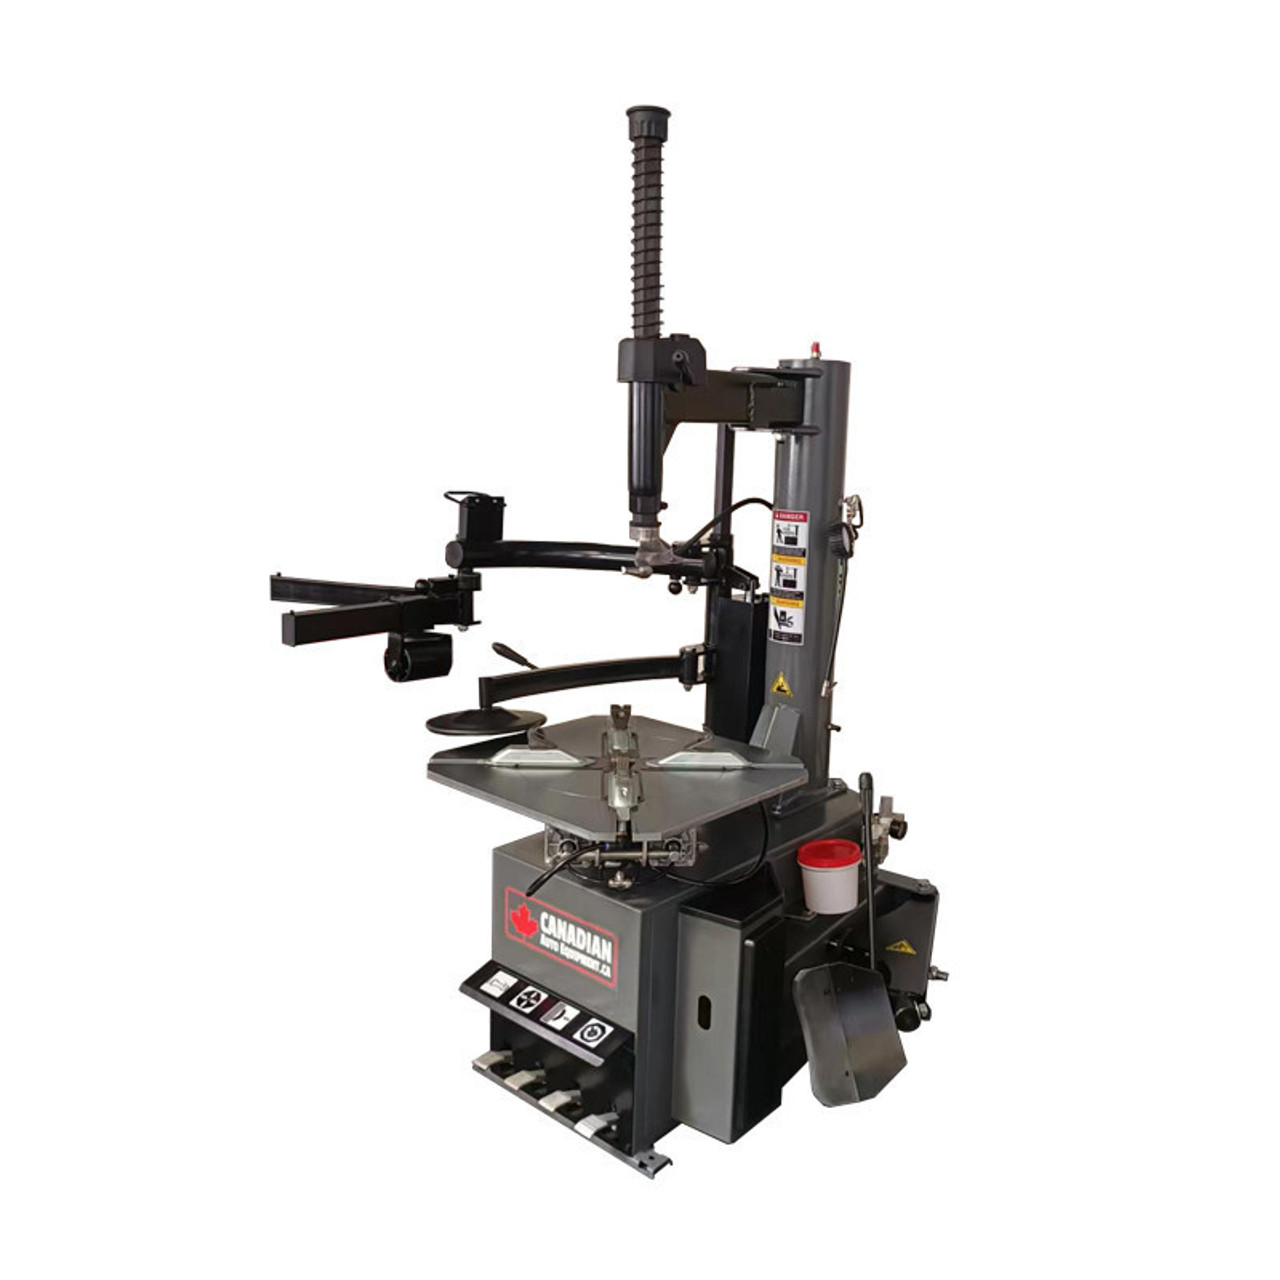 CAE-2725DAA Tire Changer with Left & Right Hand Assist & CAE-3226 Wheel Balancer with Automatic Entry